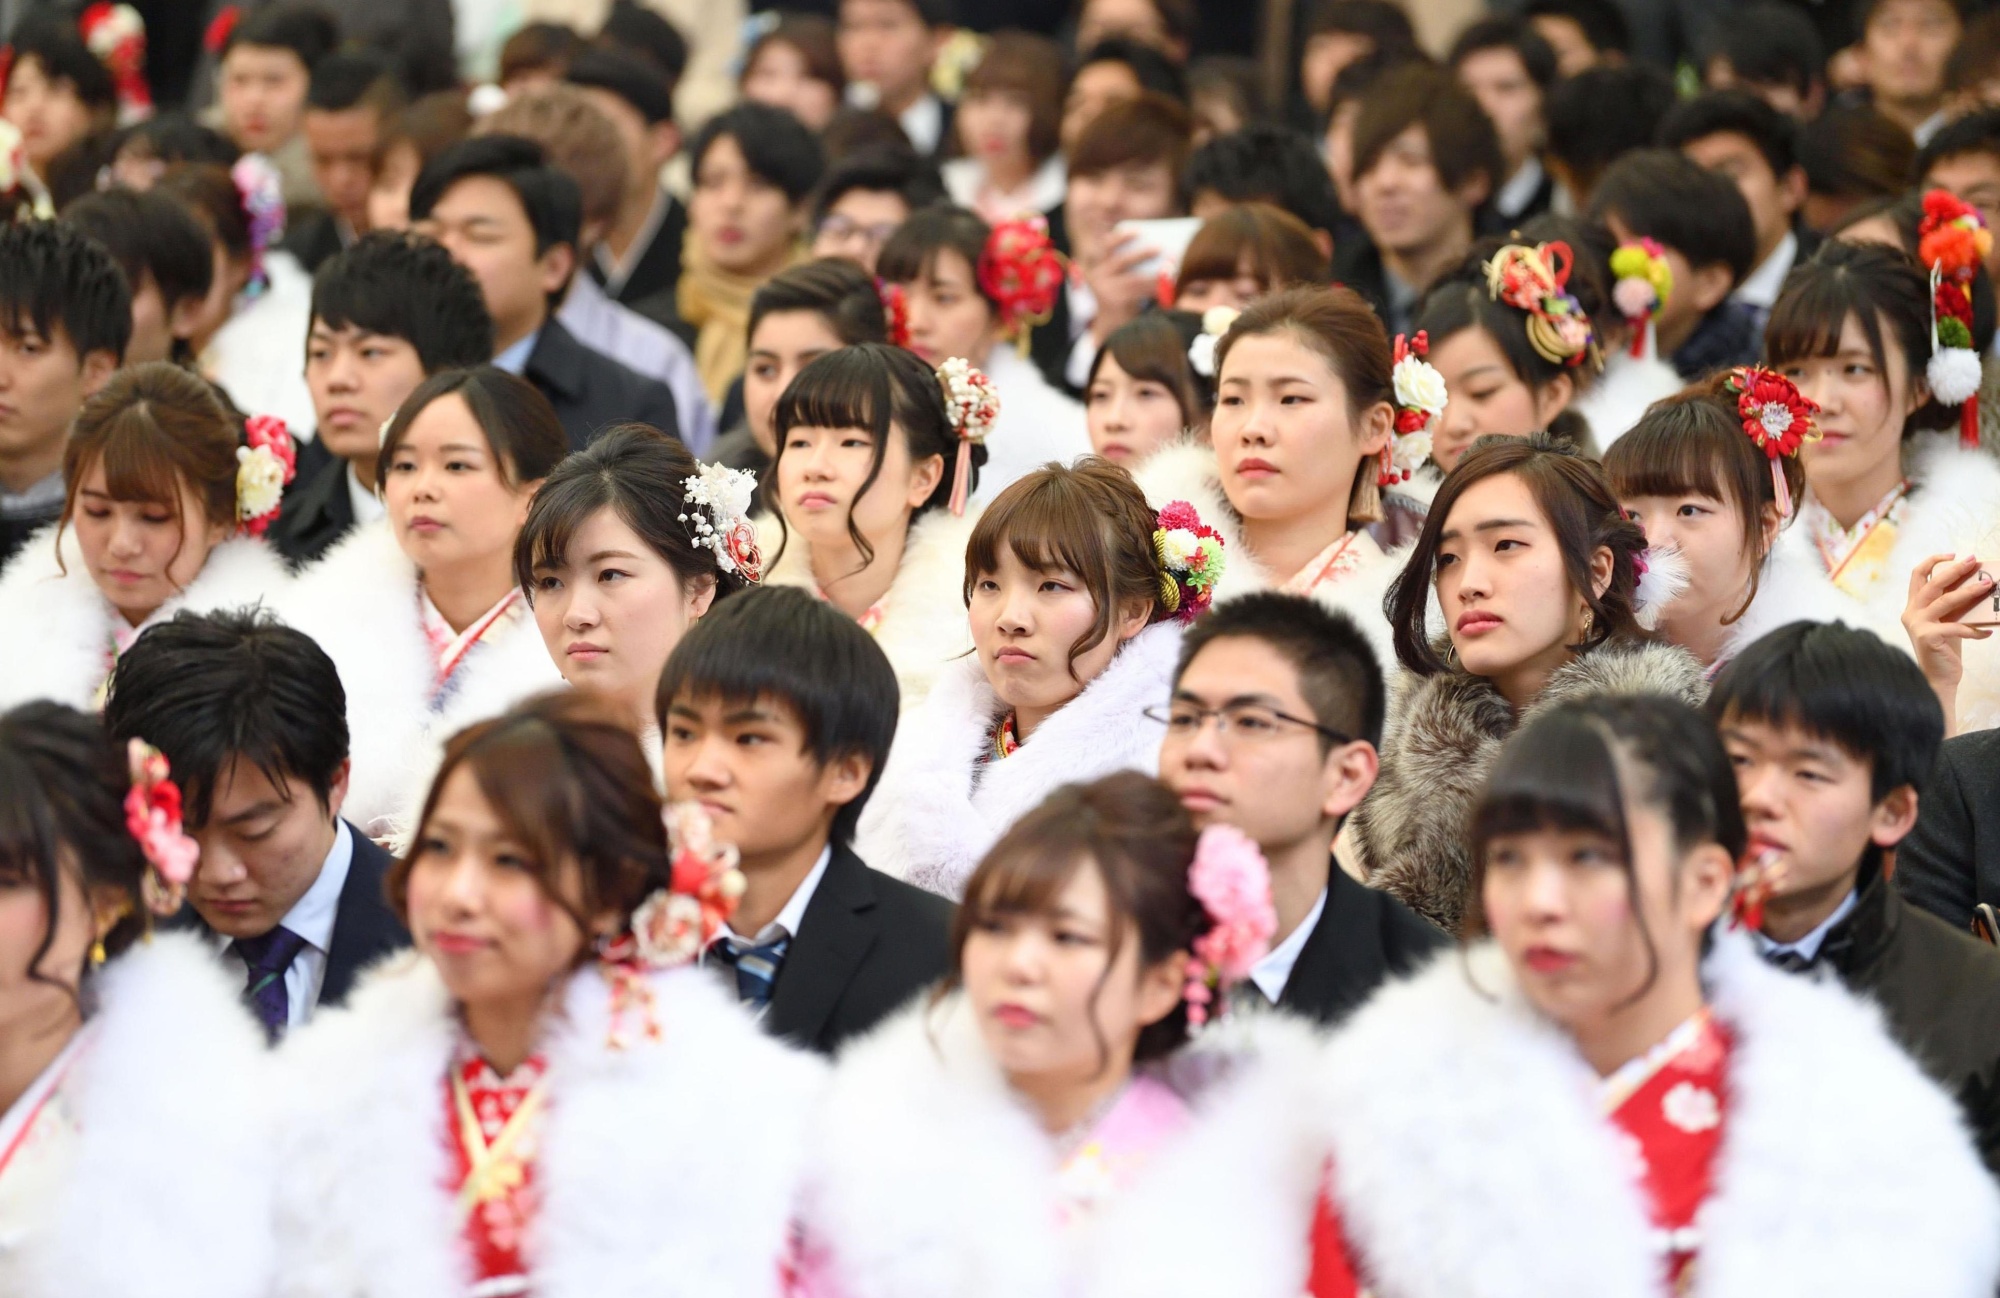 People who turned or were turning 20 attend a Coming-of-Age Day celebration ceremony at Tokyo Disneyland in Urayasu, Chiba Prefecture, on Jan. 8. The Diet on Wednesday enacted a law to lower the age of adulthood to 18 from 20. | KYODO